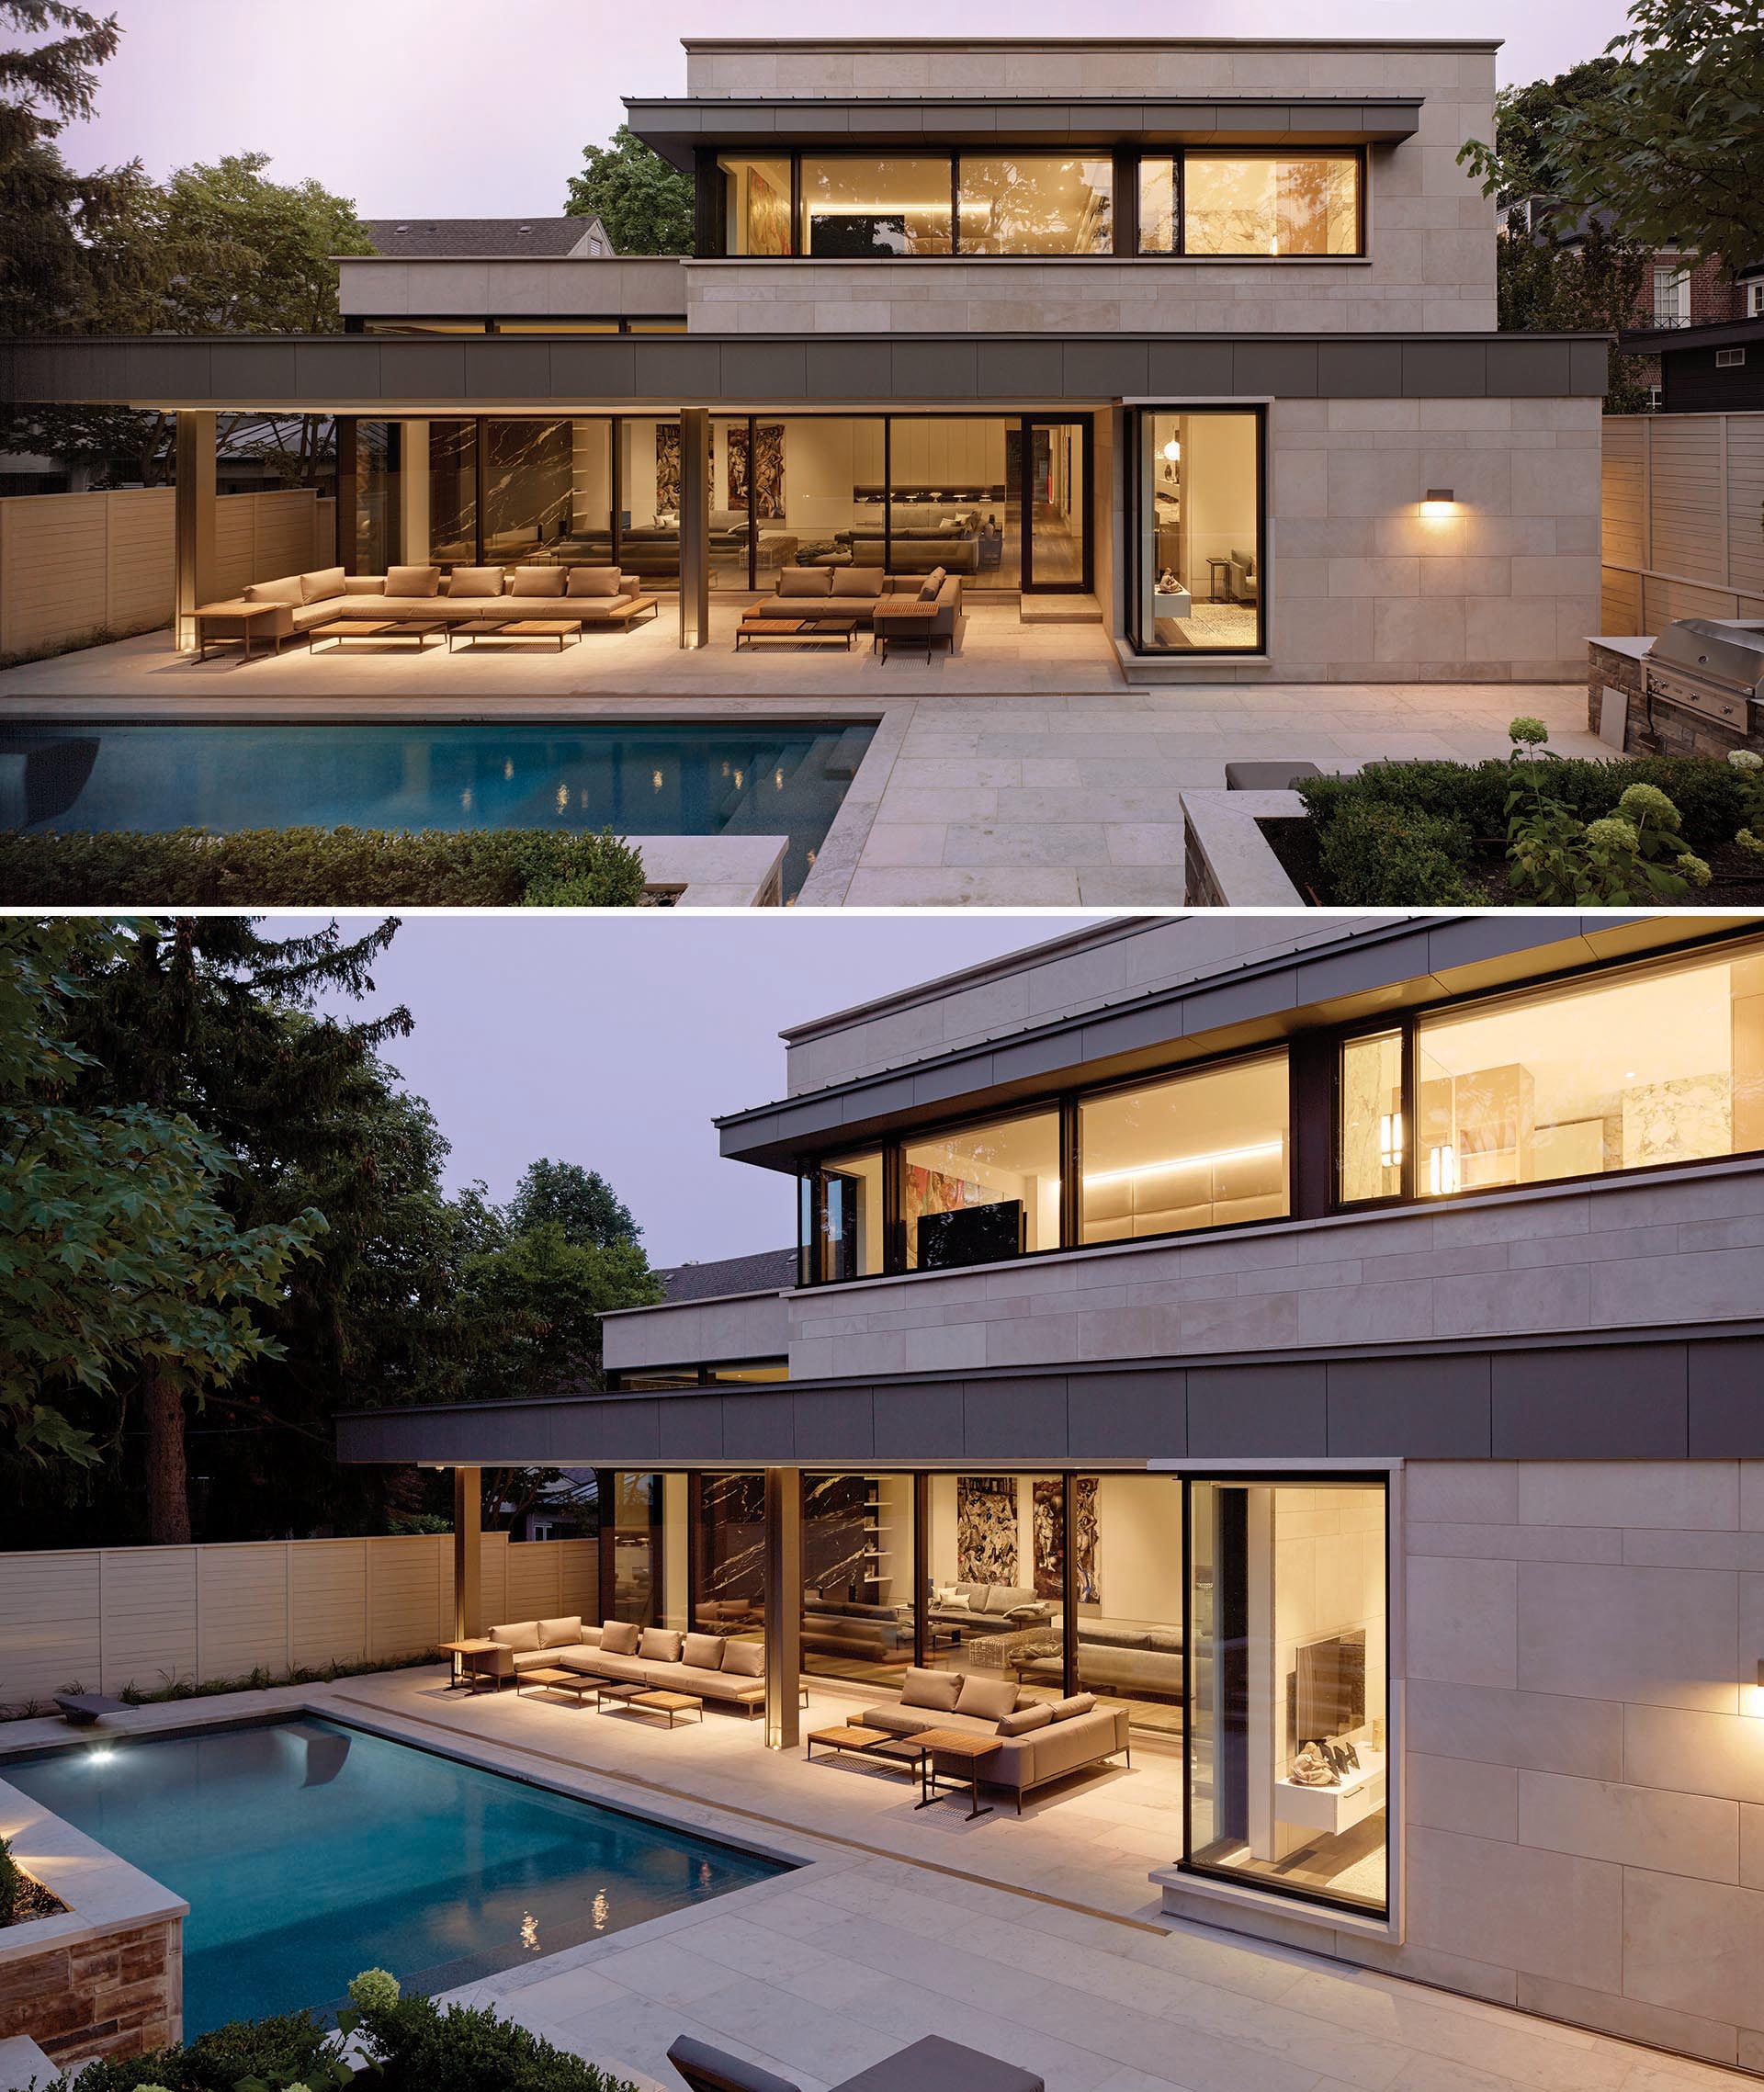 A modern house clad in limestone, opens up to an covered outdoor space and a swimming pool.